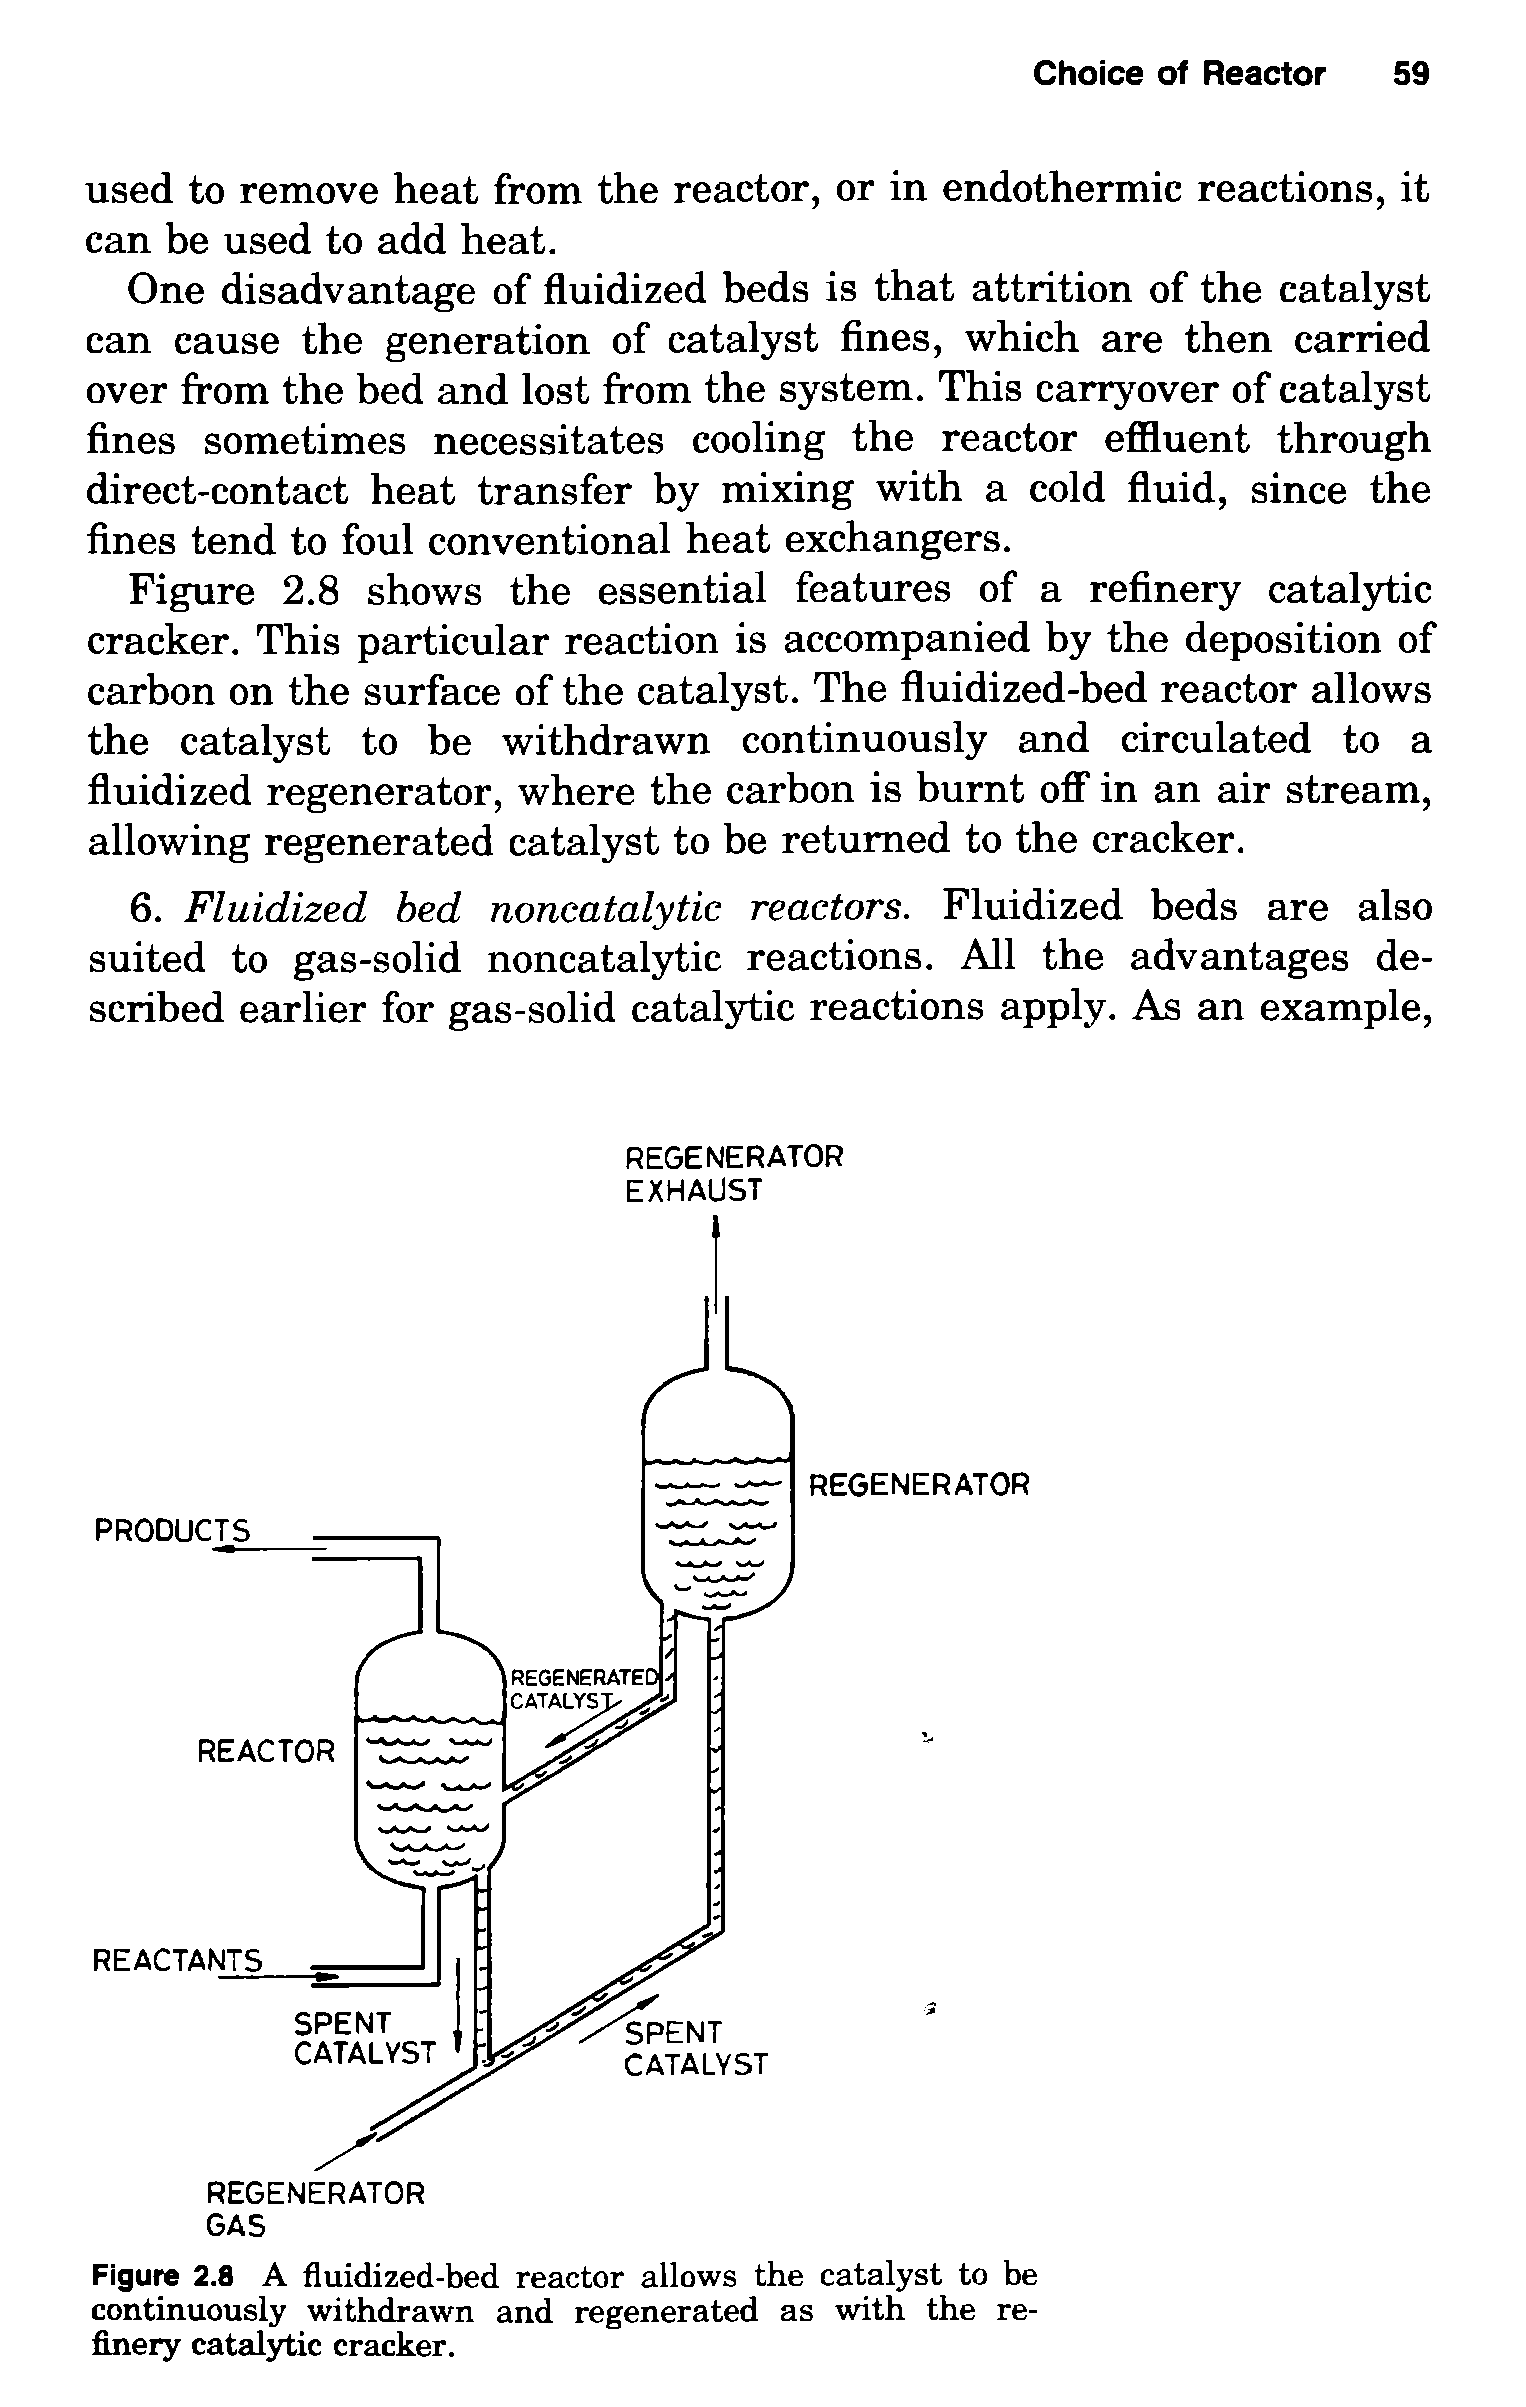 Figure 2.8 A fluidized-bed reactor allows the catalyst to be continuously withdrawn and regenerated as with the refinery catalytic cracker.